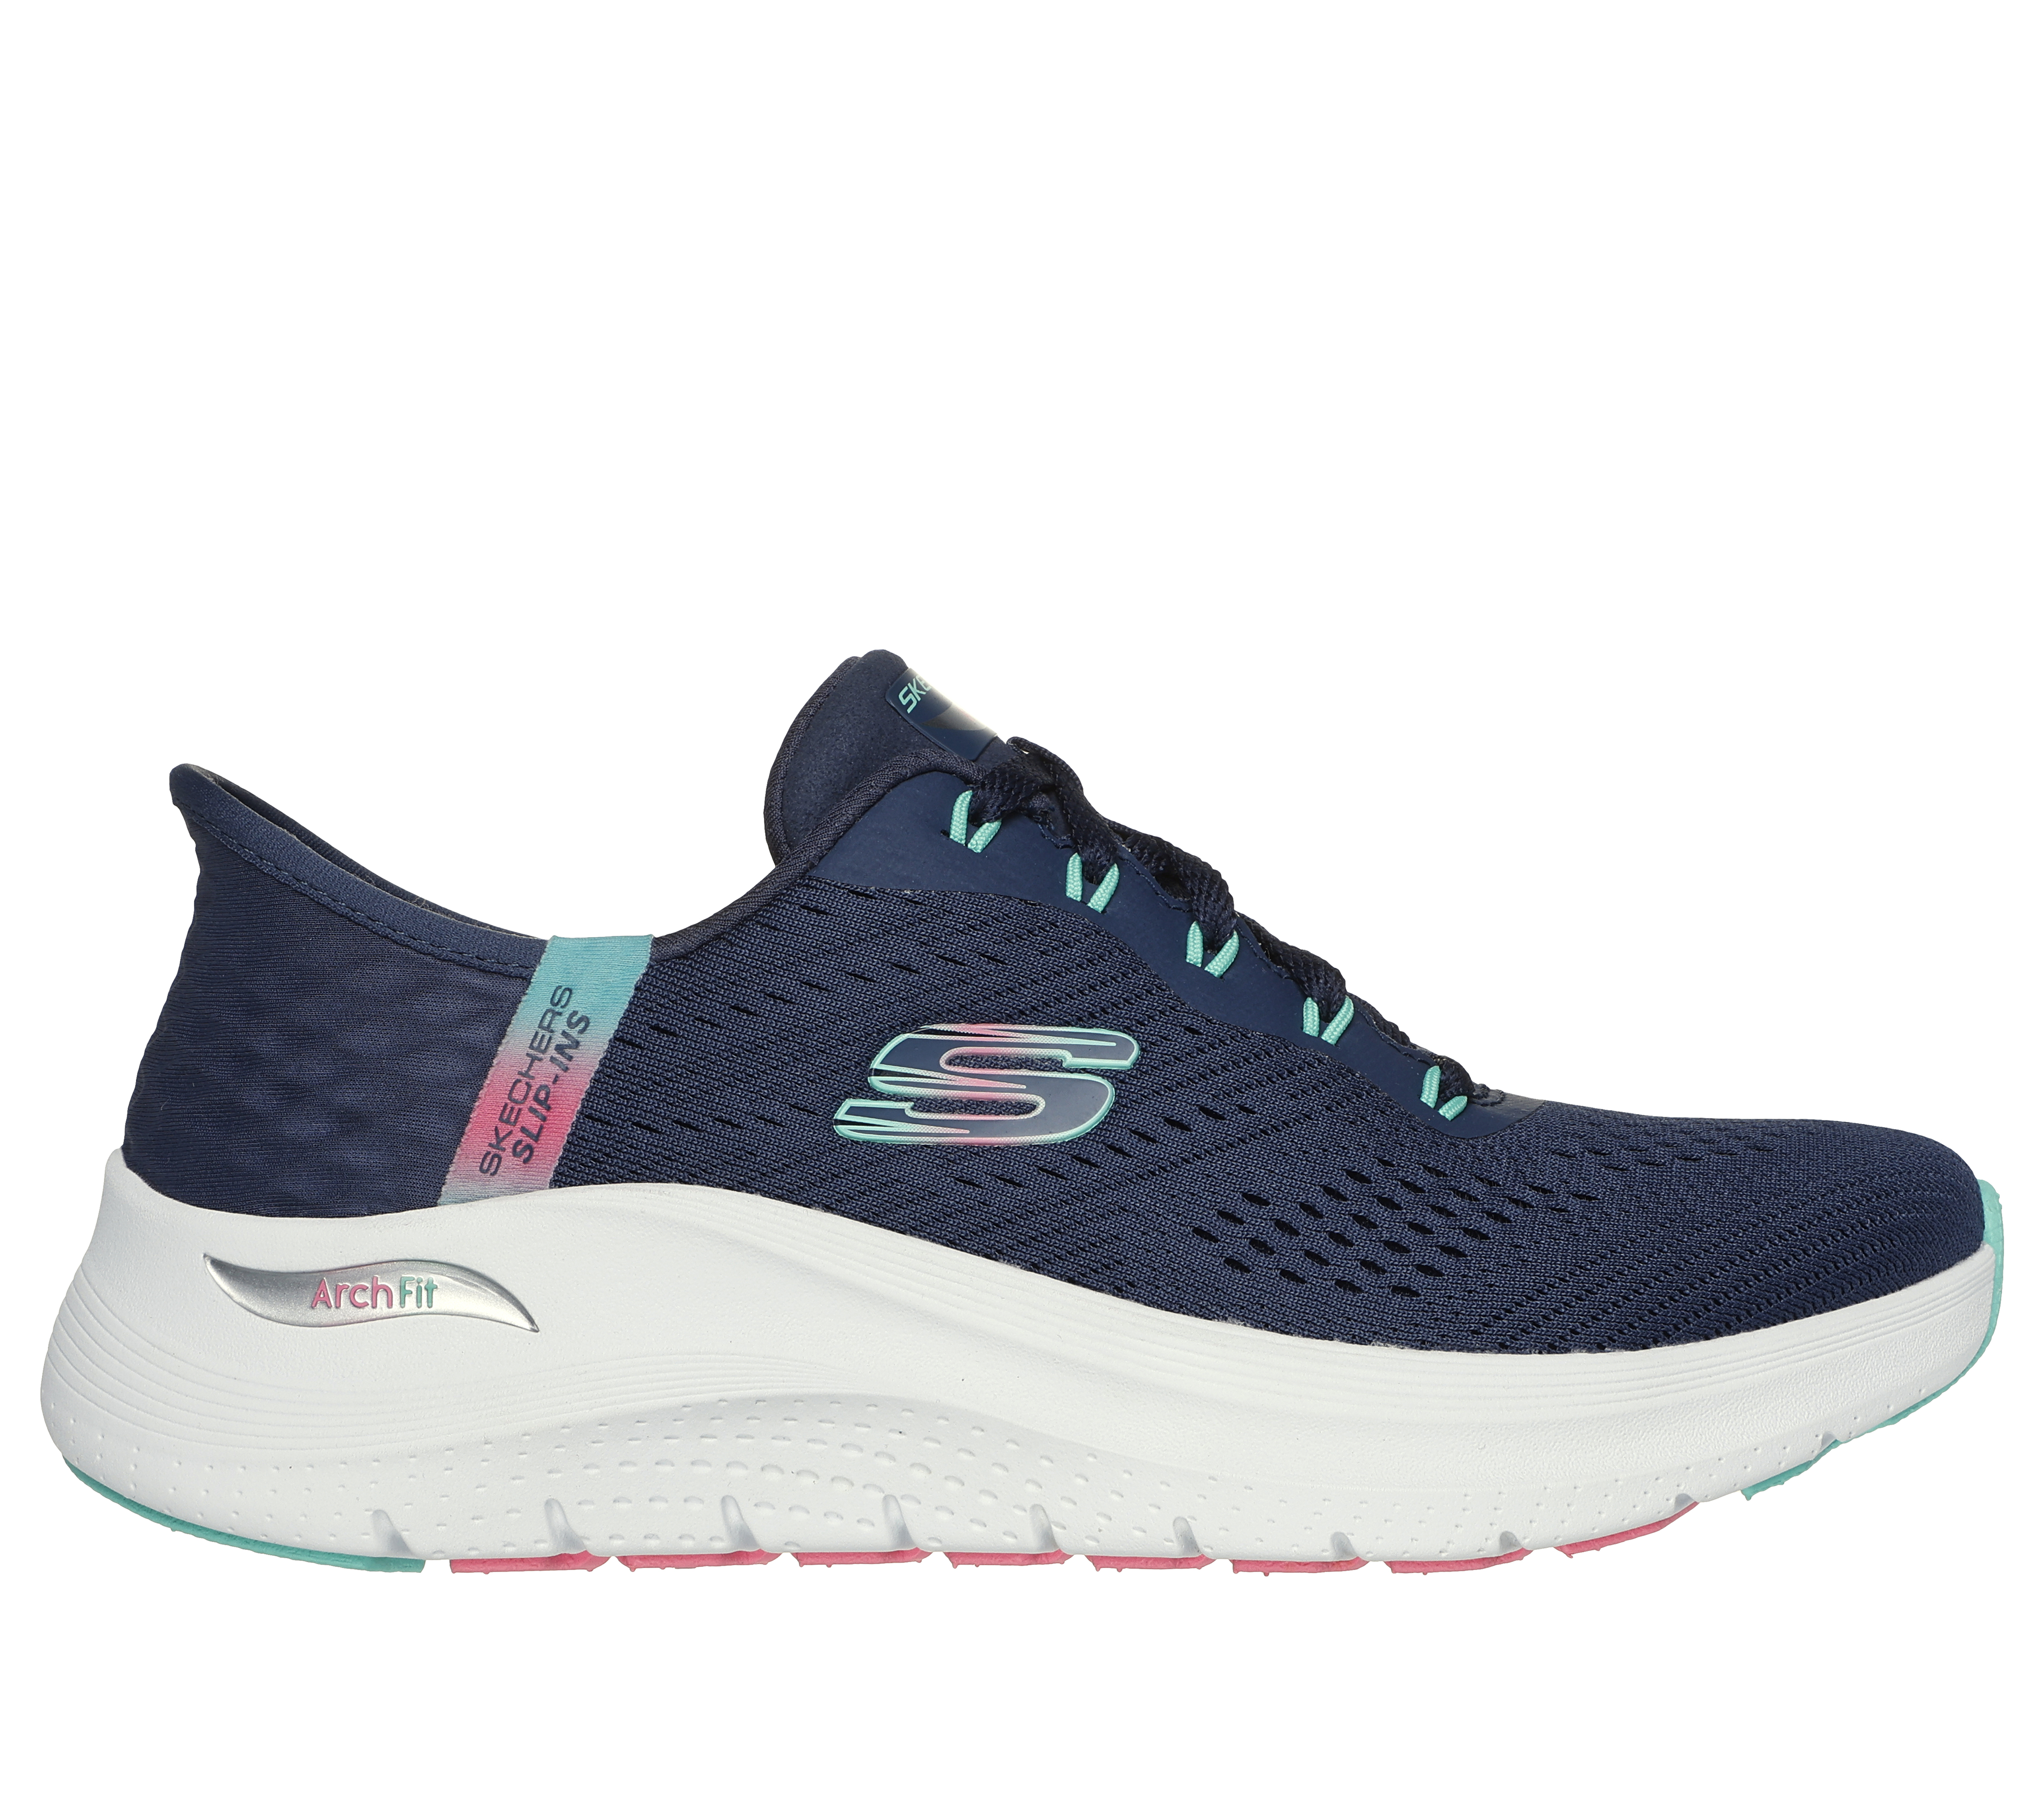 Shop the Skechers Slip-ins: Arch Fit 2.0 - Easy Chic | SKECHERS CA